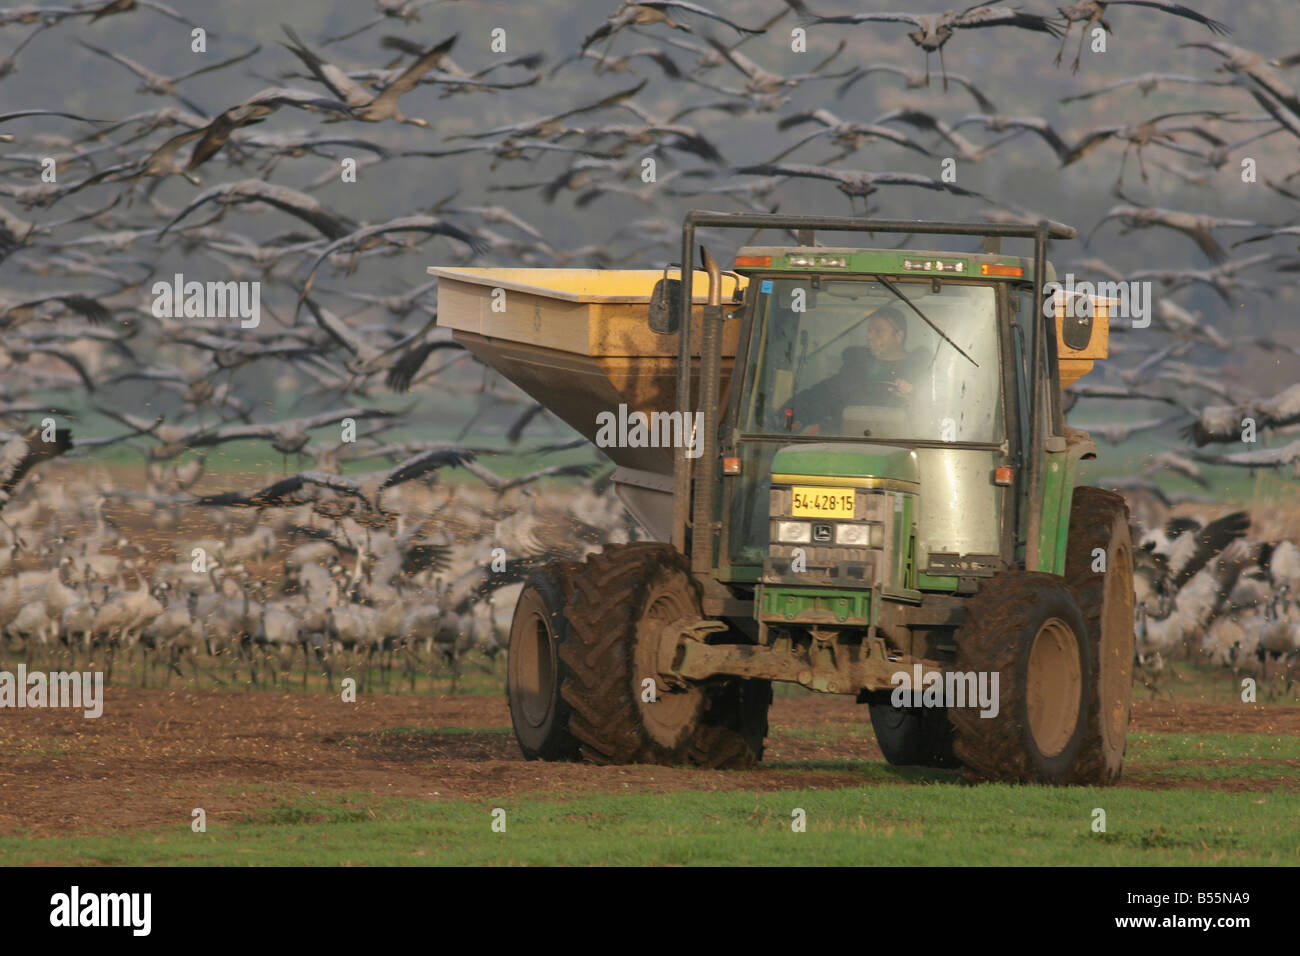 Israel Hula Valley a tractor spreading corn grain to feed a large flock of Eurasian Cranes February 2008 Stock Photo